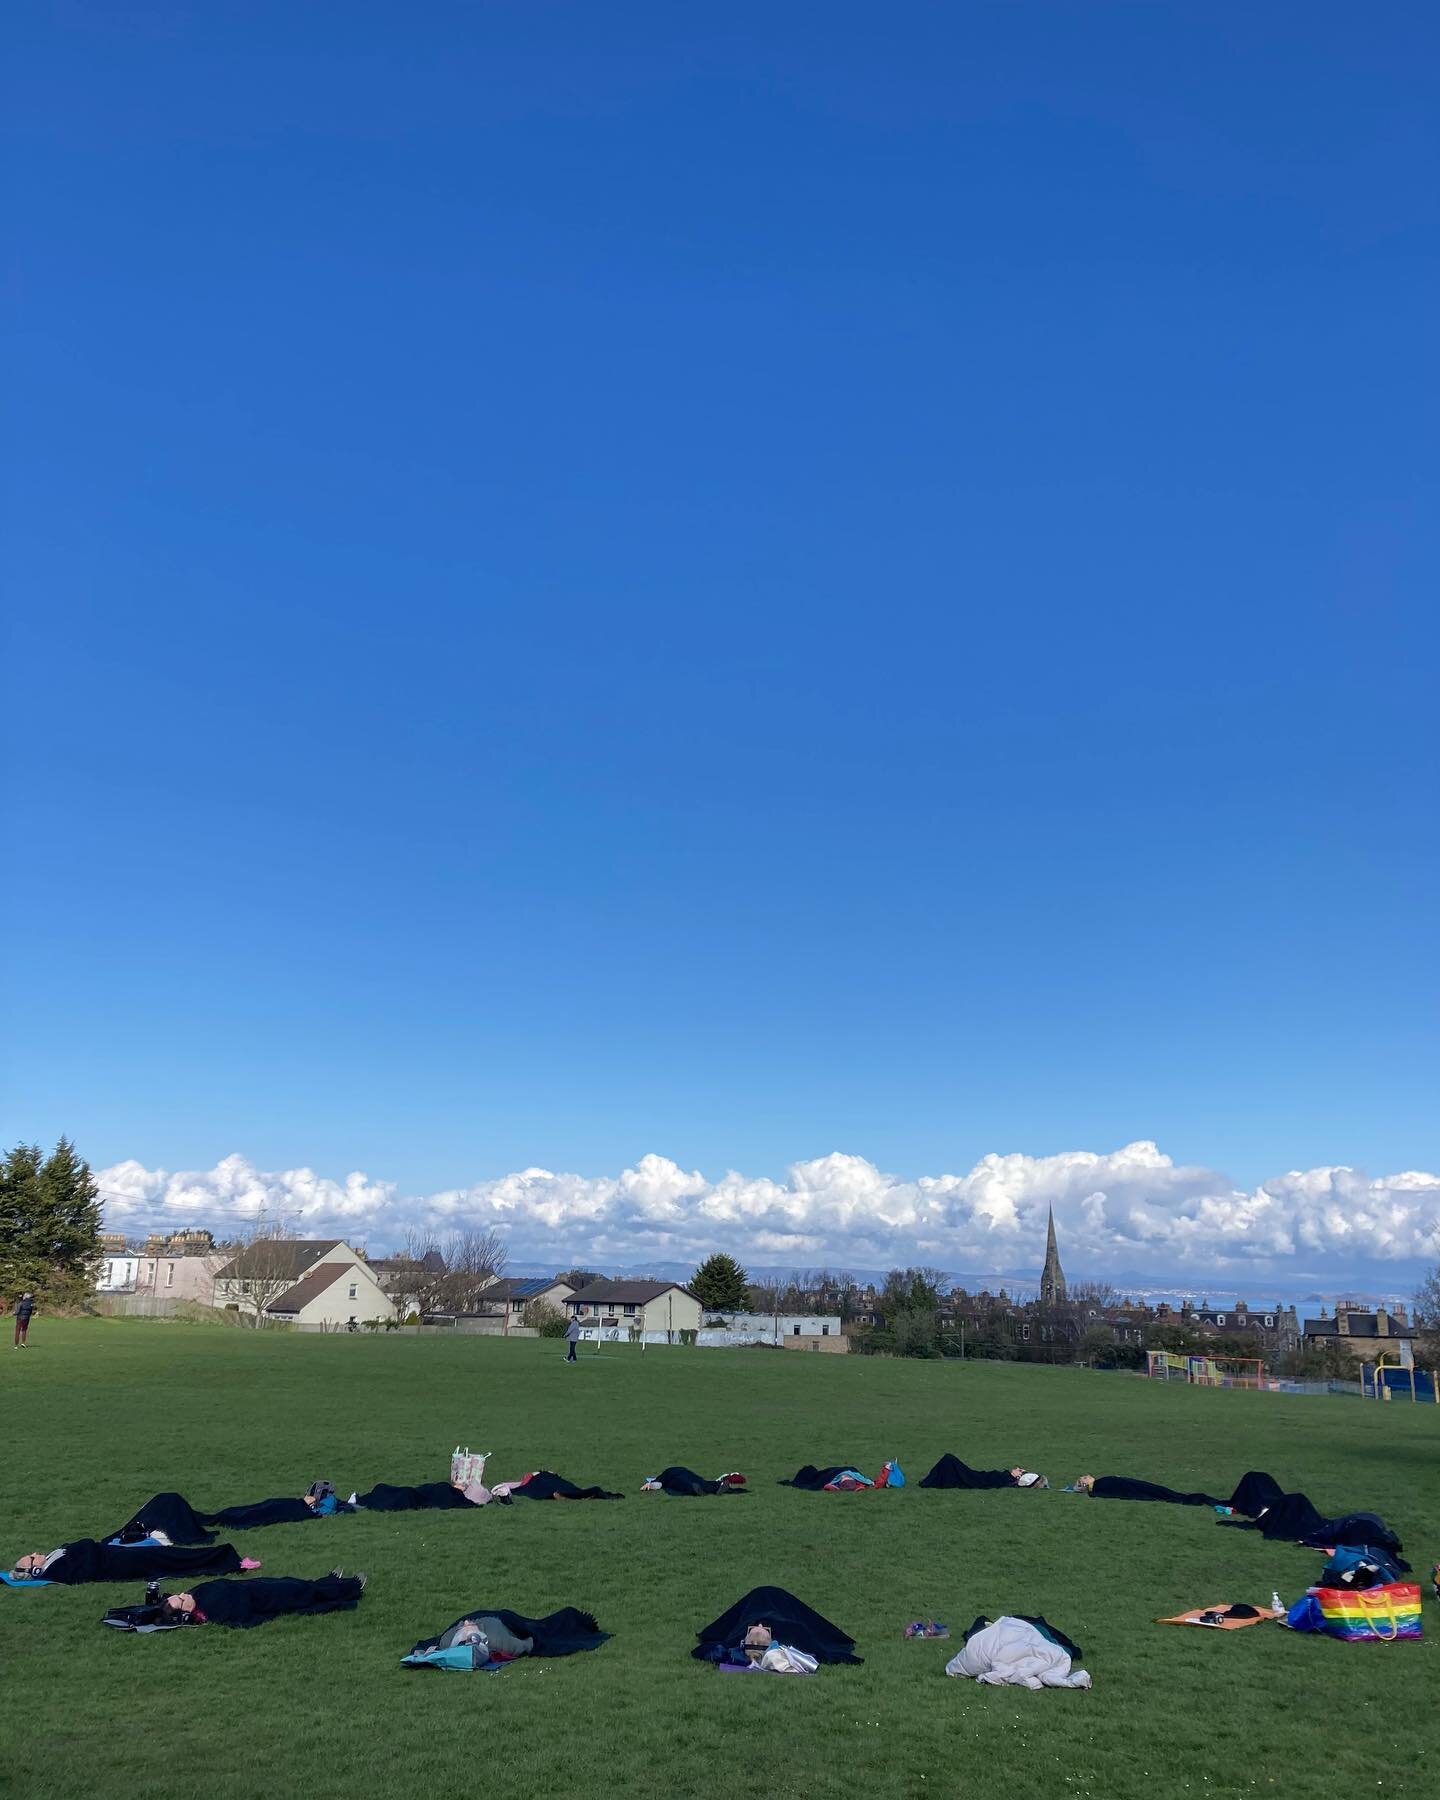 18 newbies moving and resting under this glorious blue sky at a special Move To Feel party this morning 🌤🥳

MTF Party 🎈 Have your guests suggest tunes they love, pick a venue and I&rsquo;ll guide you all on a journey into play, release, freedom, j